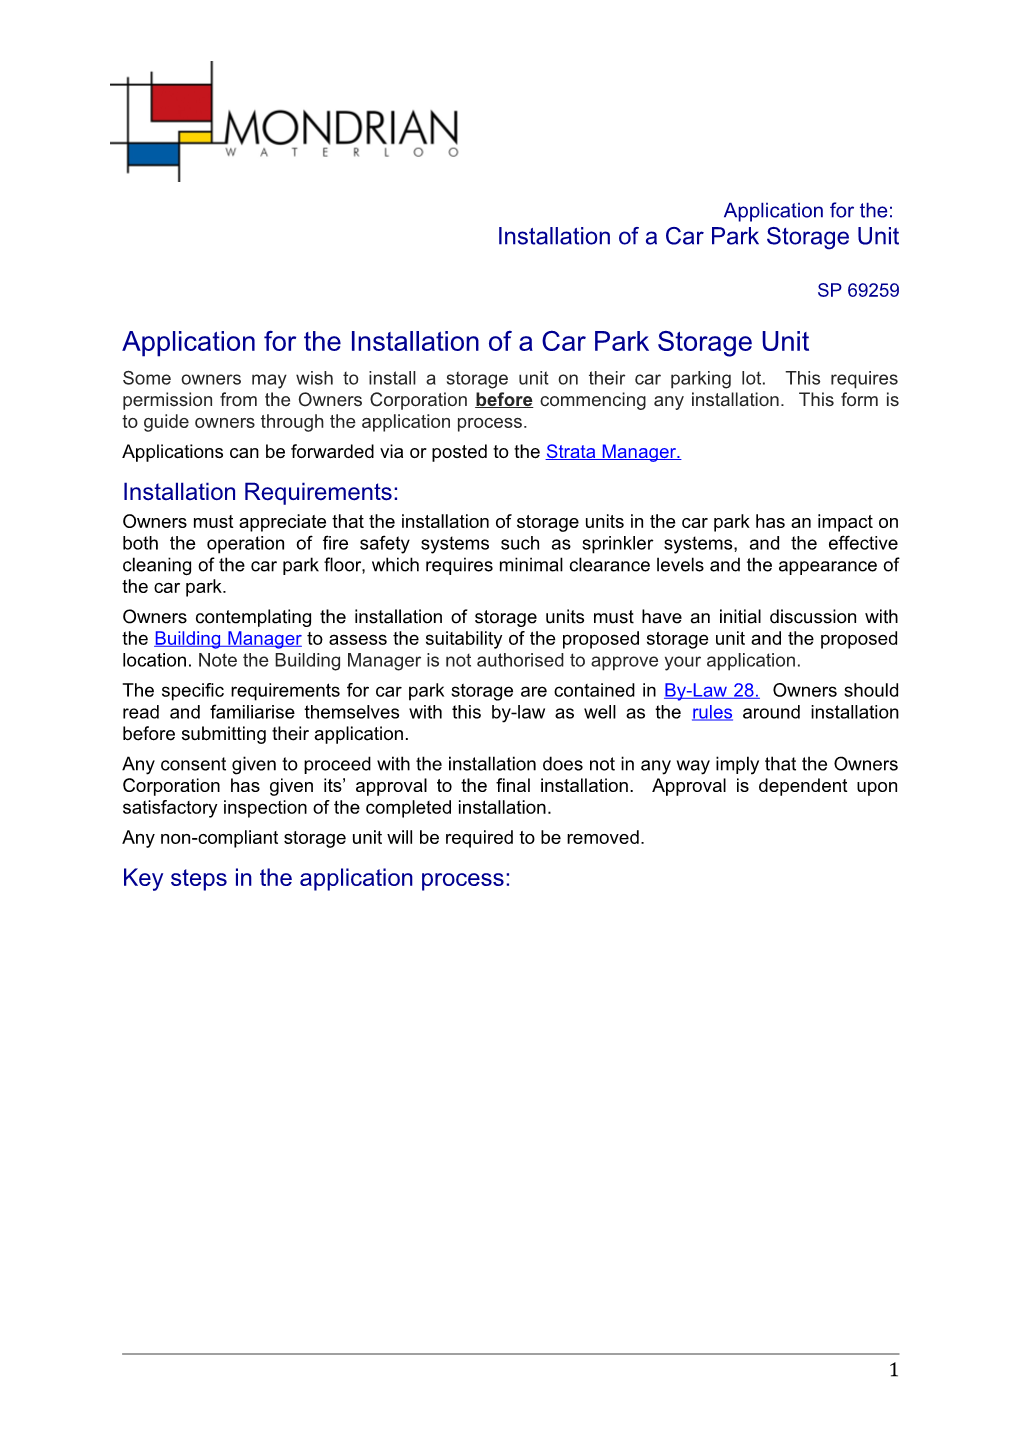 Application for the Installation of a Car Park Storage Unit